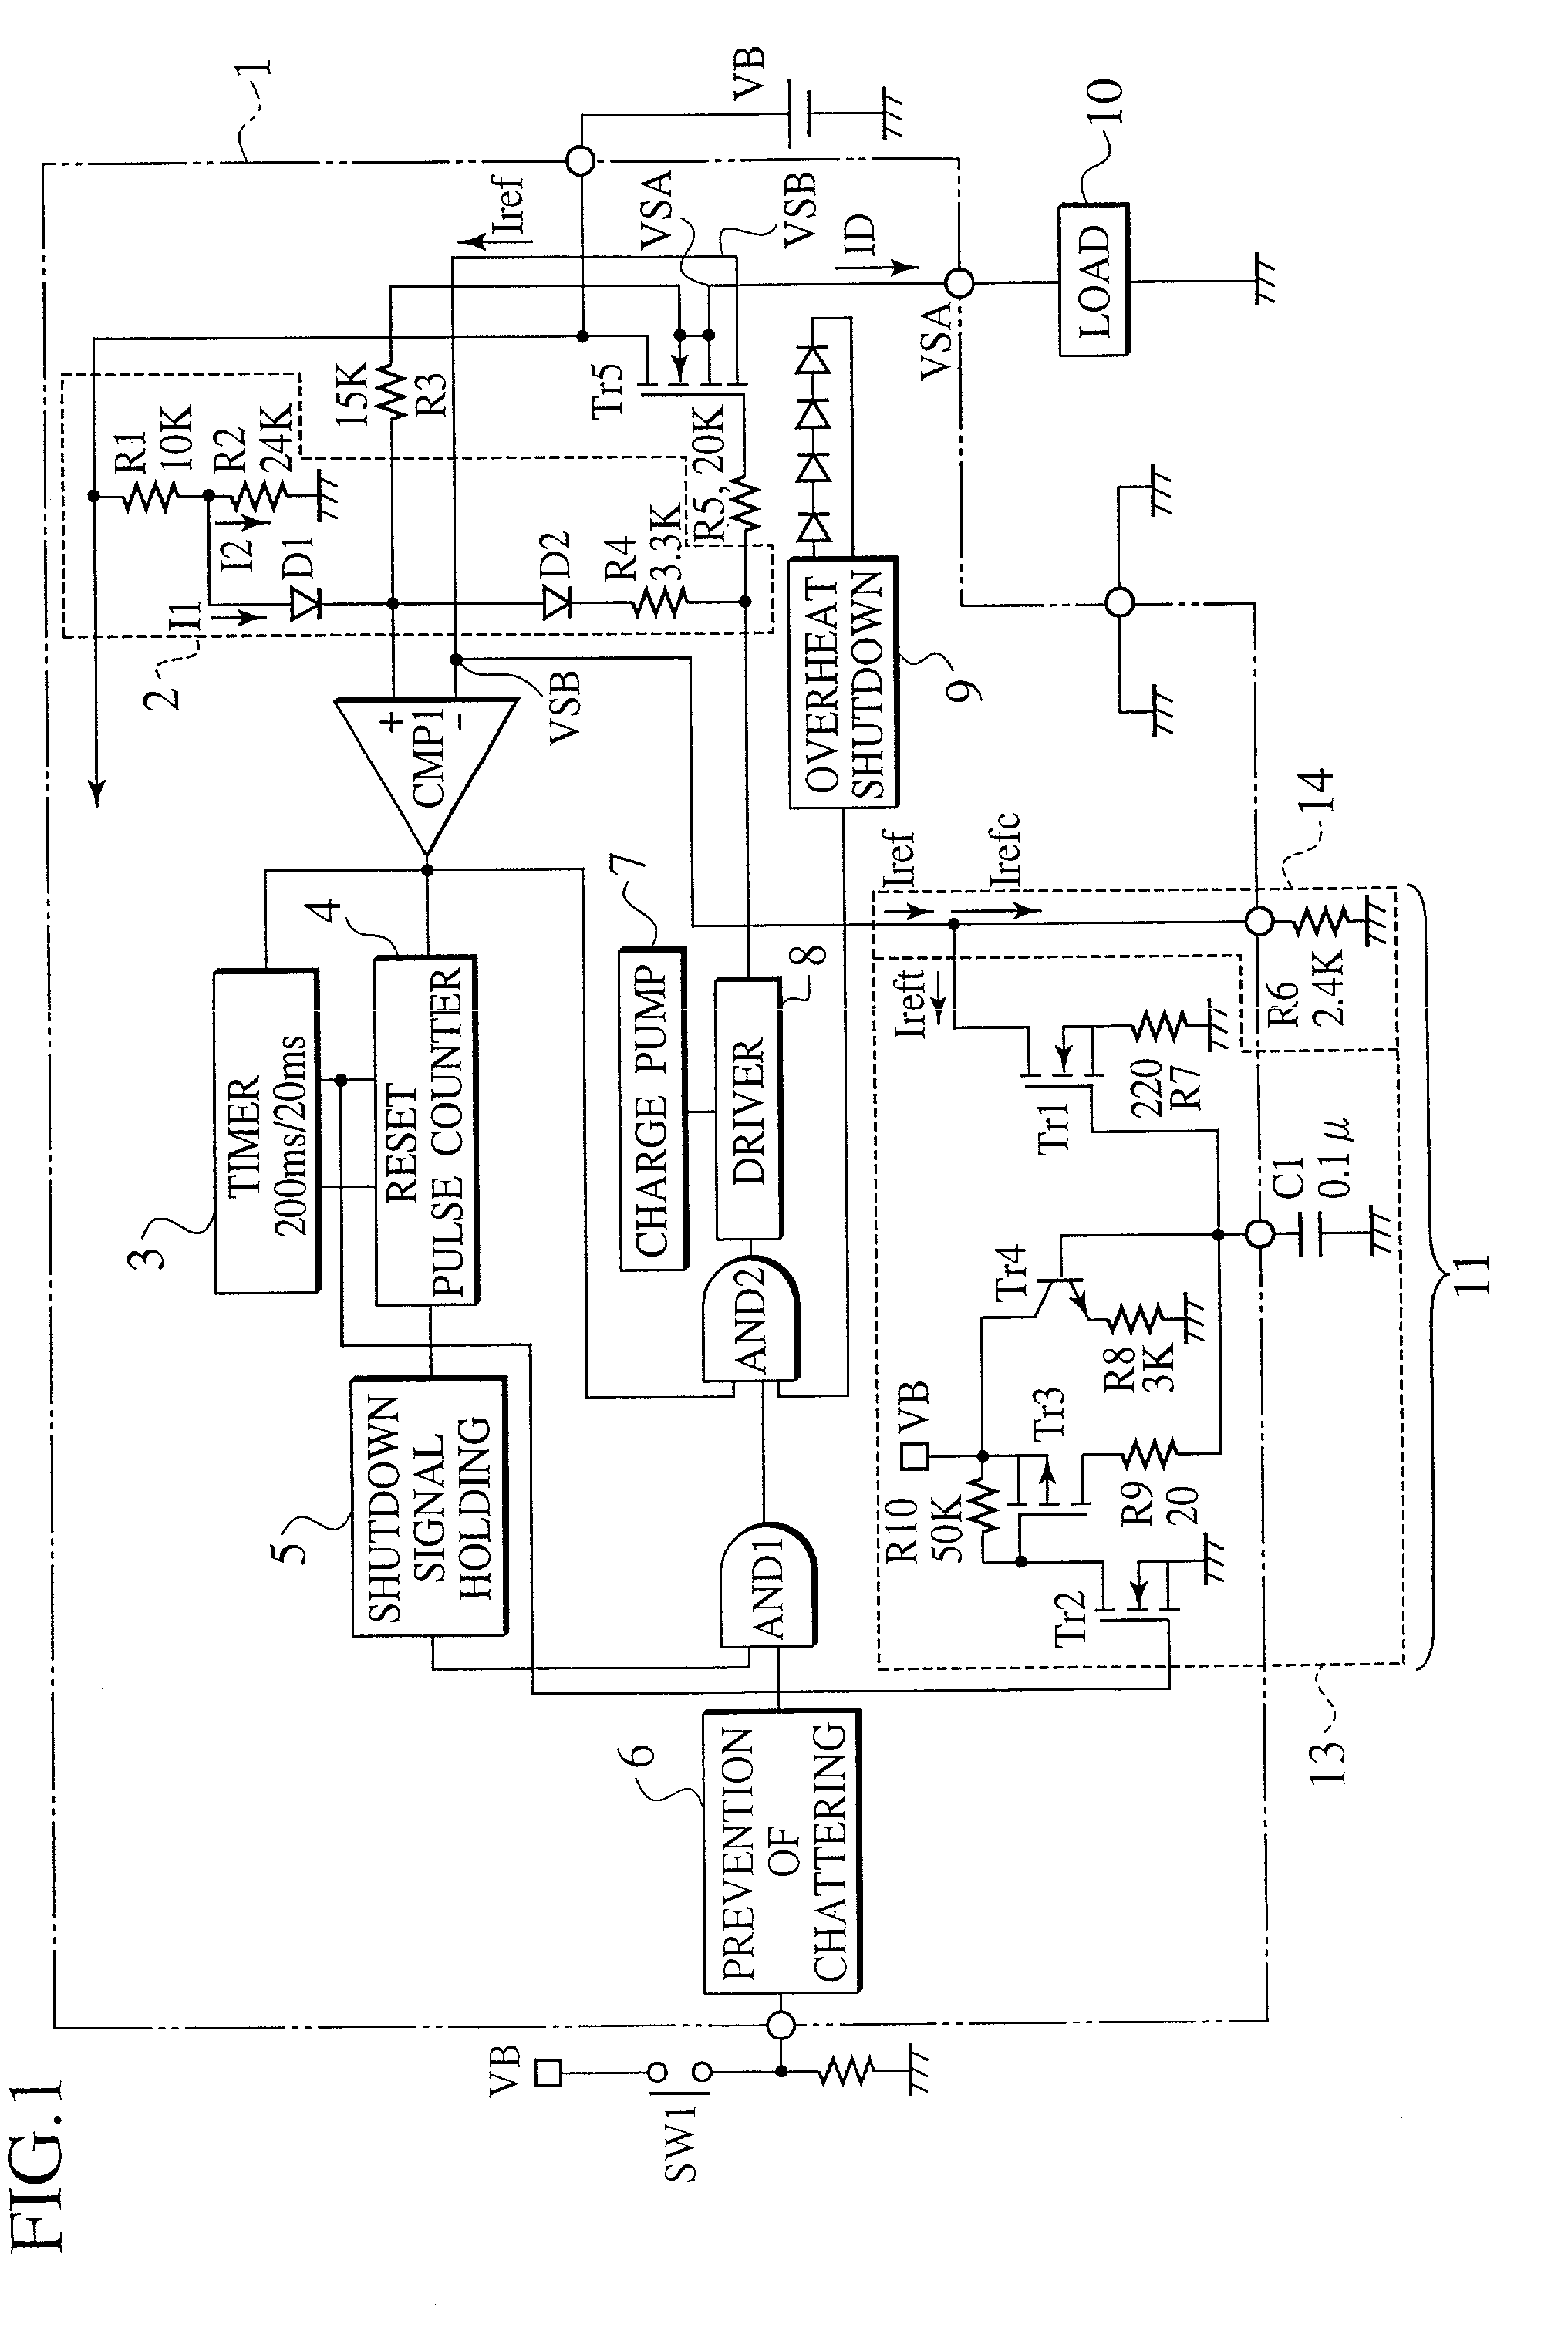 Semiconductor switching device with function for vibrating current, thereby shutting down over-current